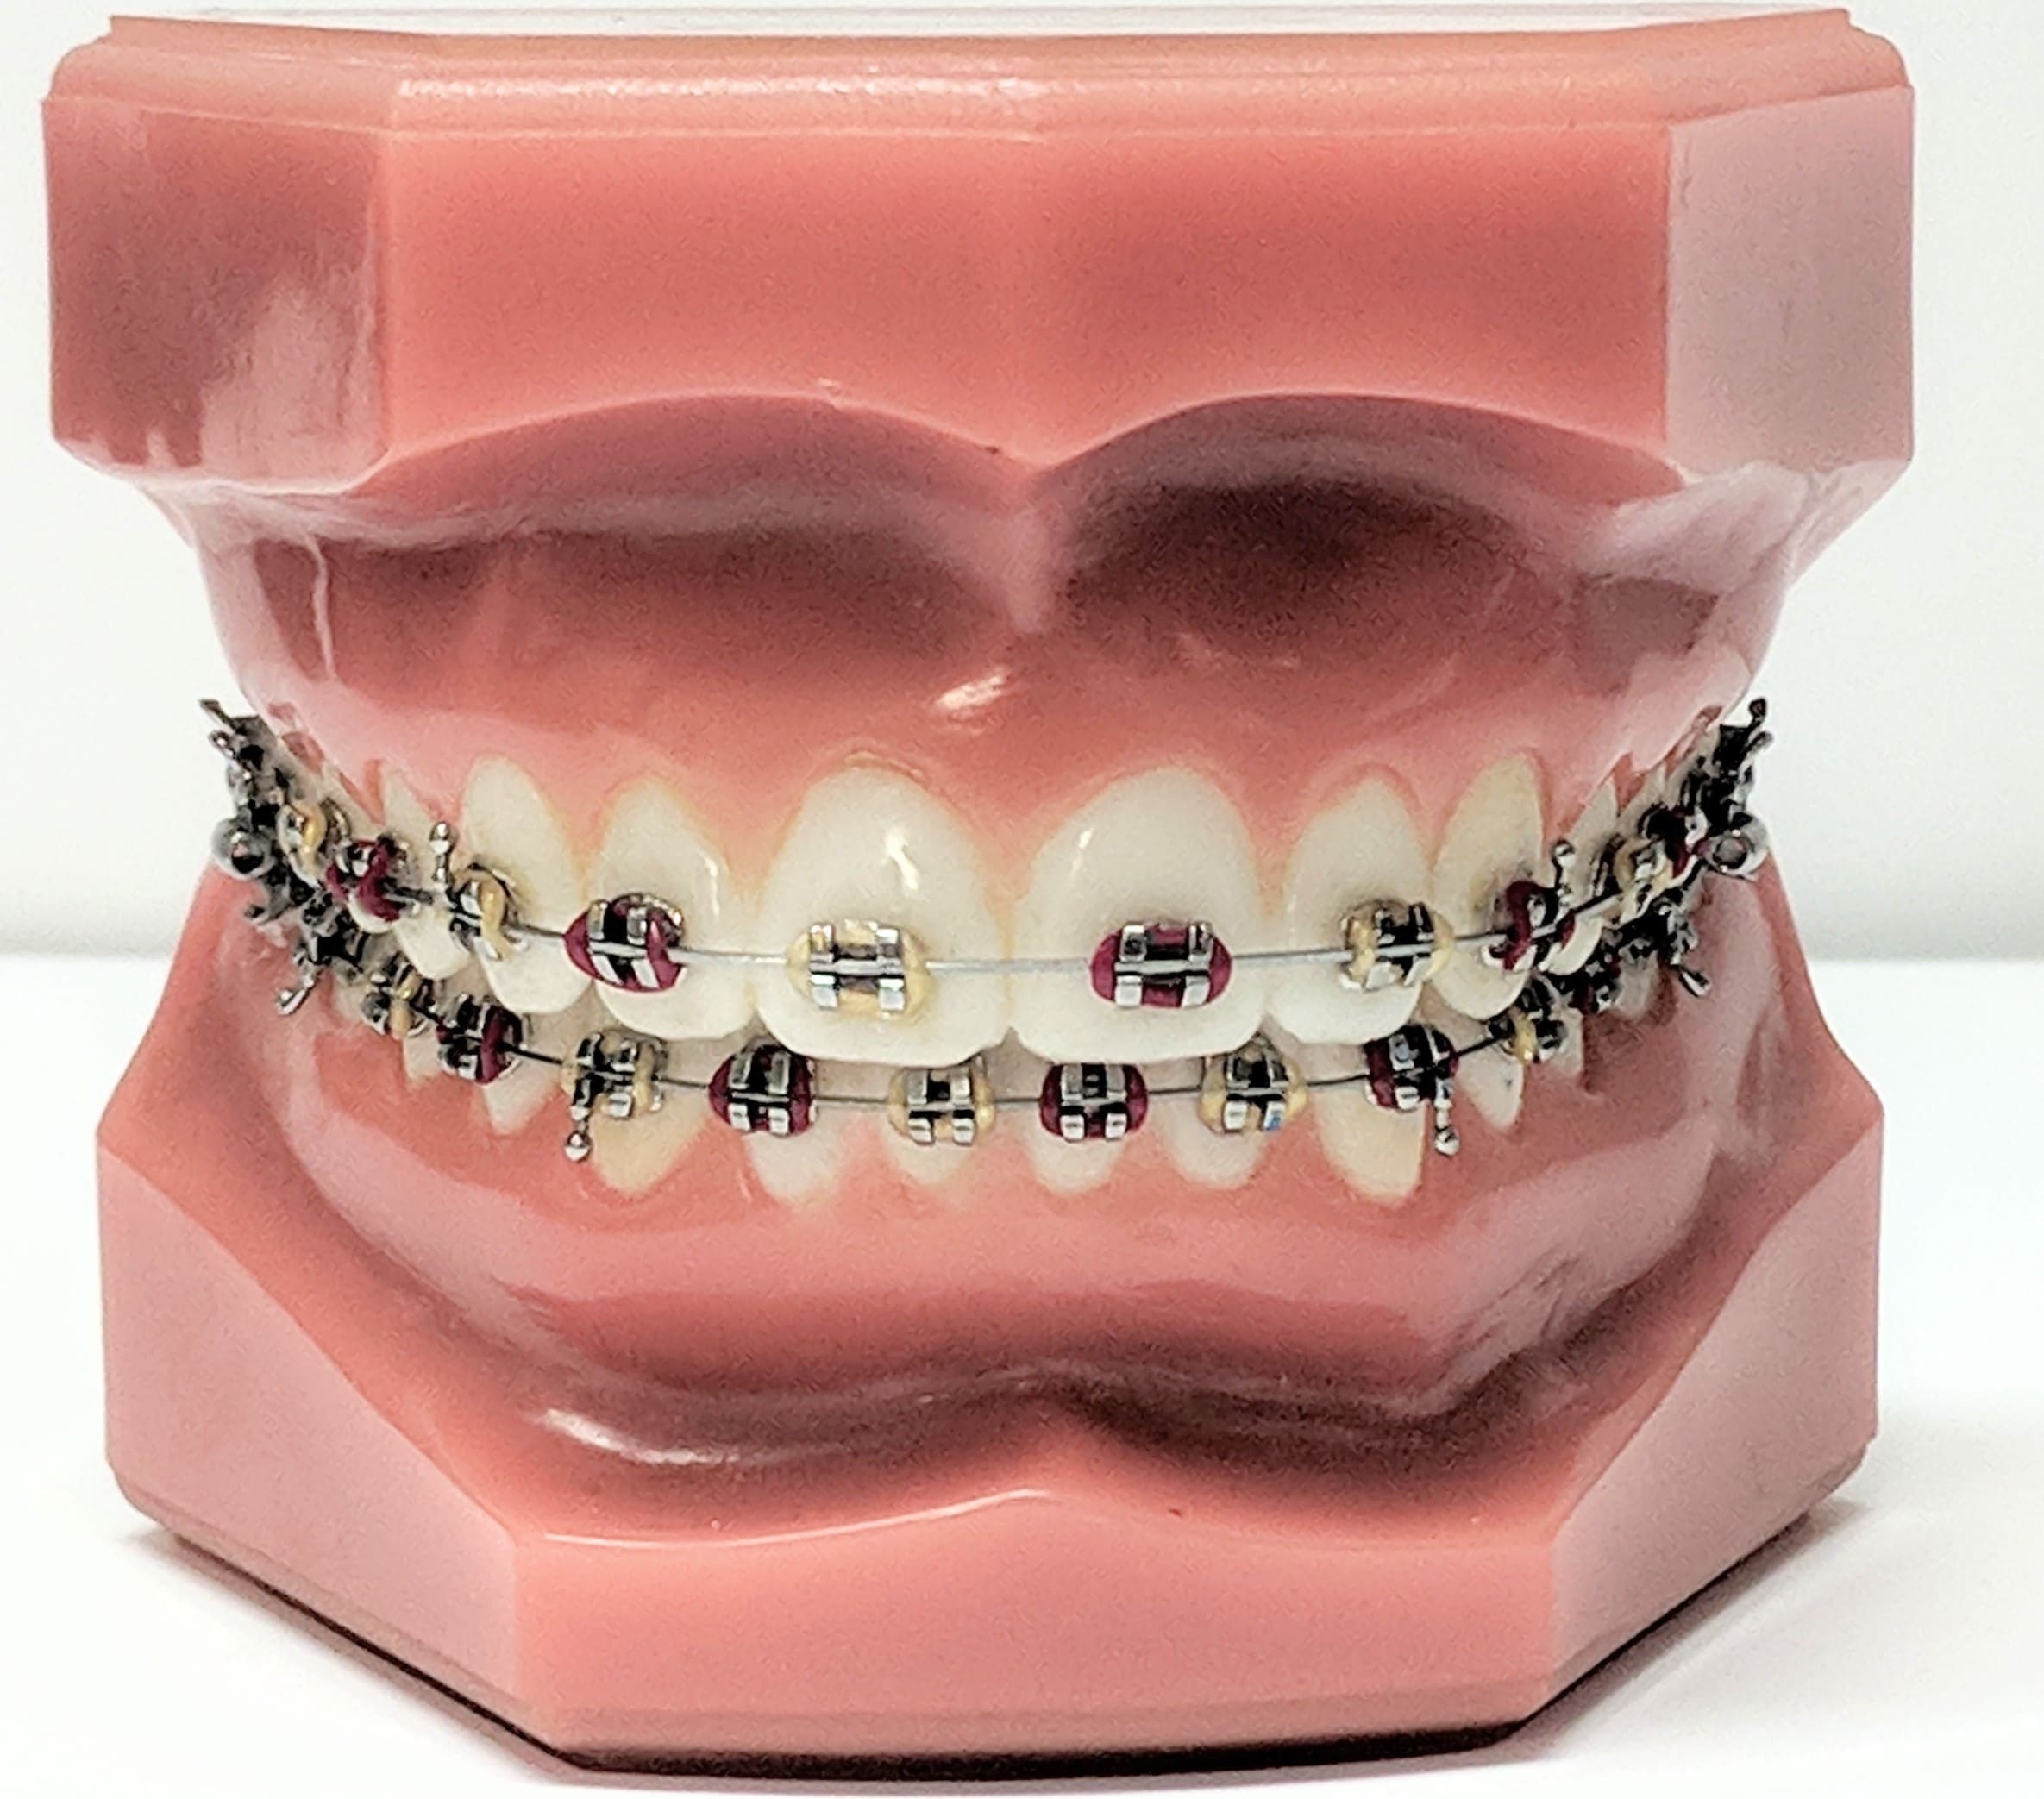 Which is Better: Metal Braces or Ceramic Braces